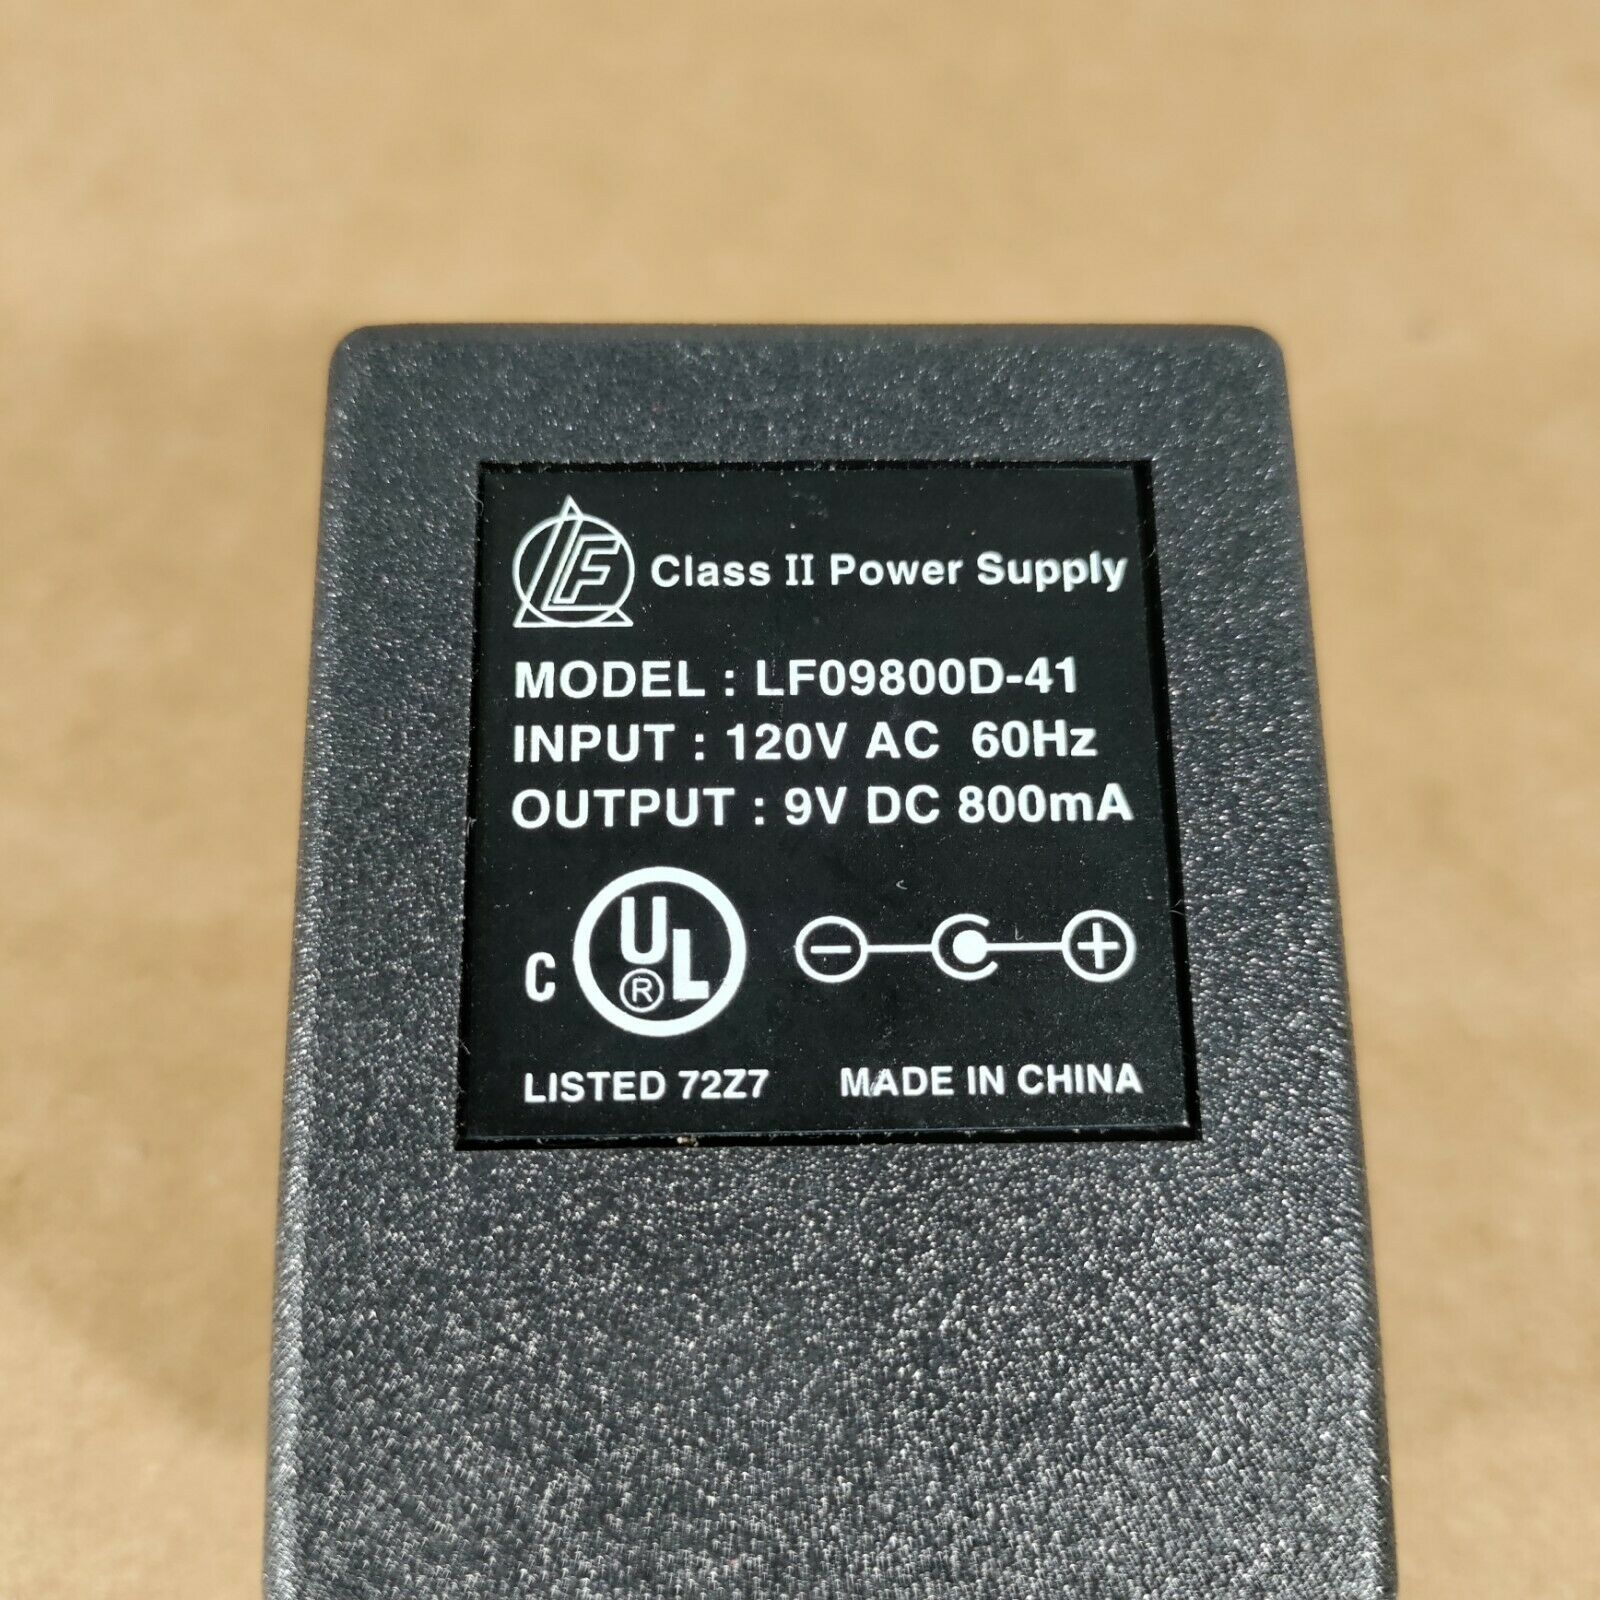 LF Class 2 AC/DC Power Supply 9v 800mA LF09800D-41 Features: new Output Voltage: 9 V Brand: Unb